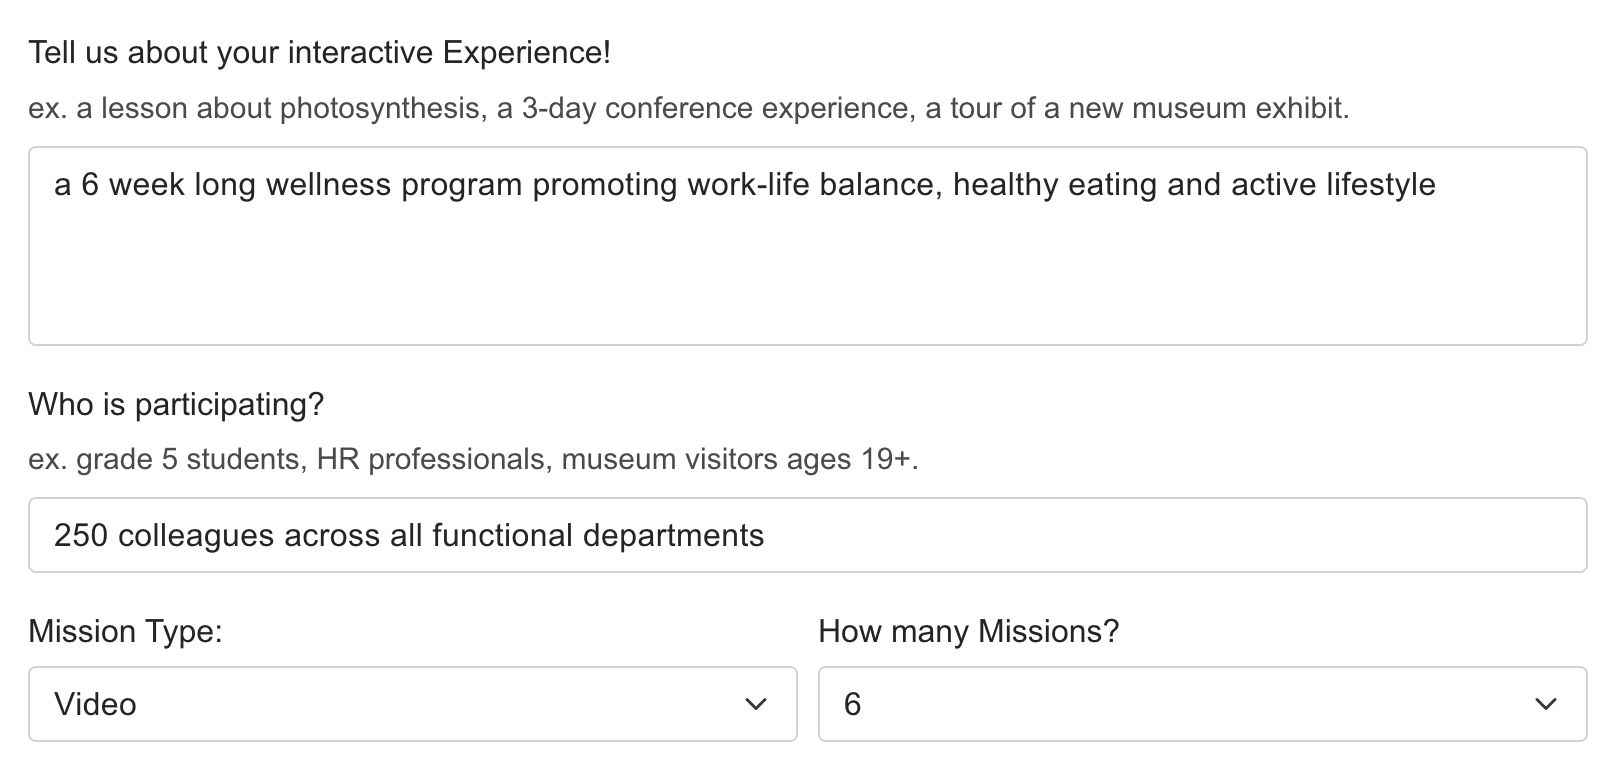 Tell us about your interactive Experiene: a 6 week long wellness program promoting work-life balance, healthy eating and active lifestyle. Who is participating? 250 colleagues across all functional departments